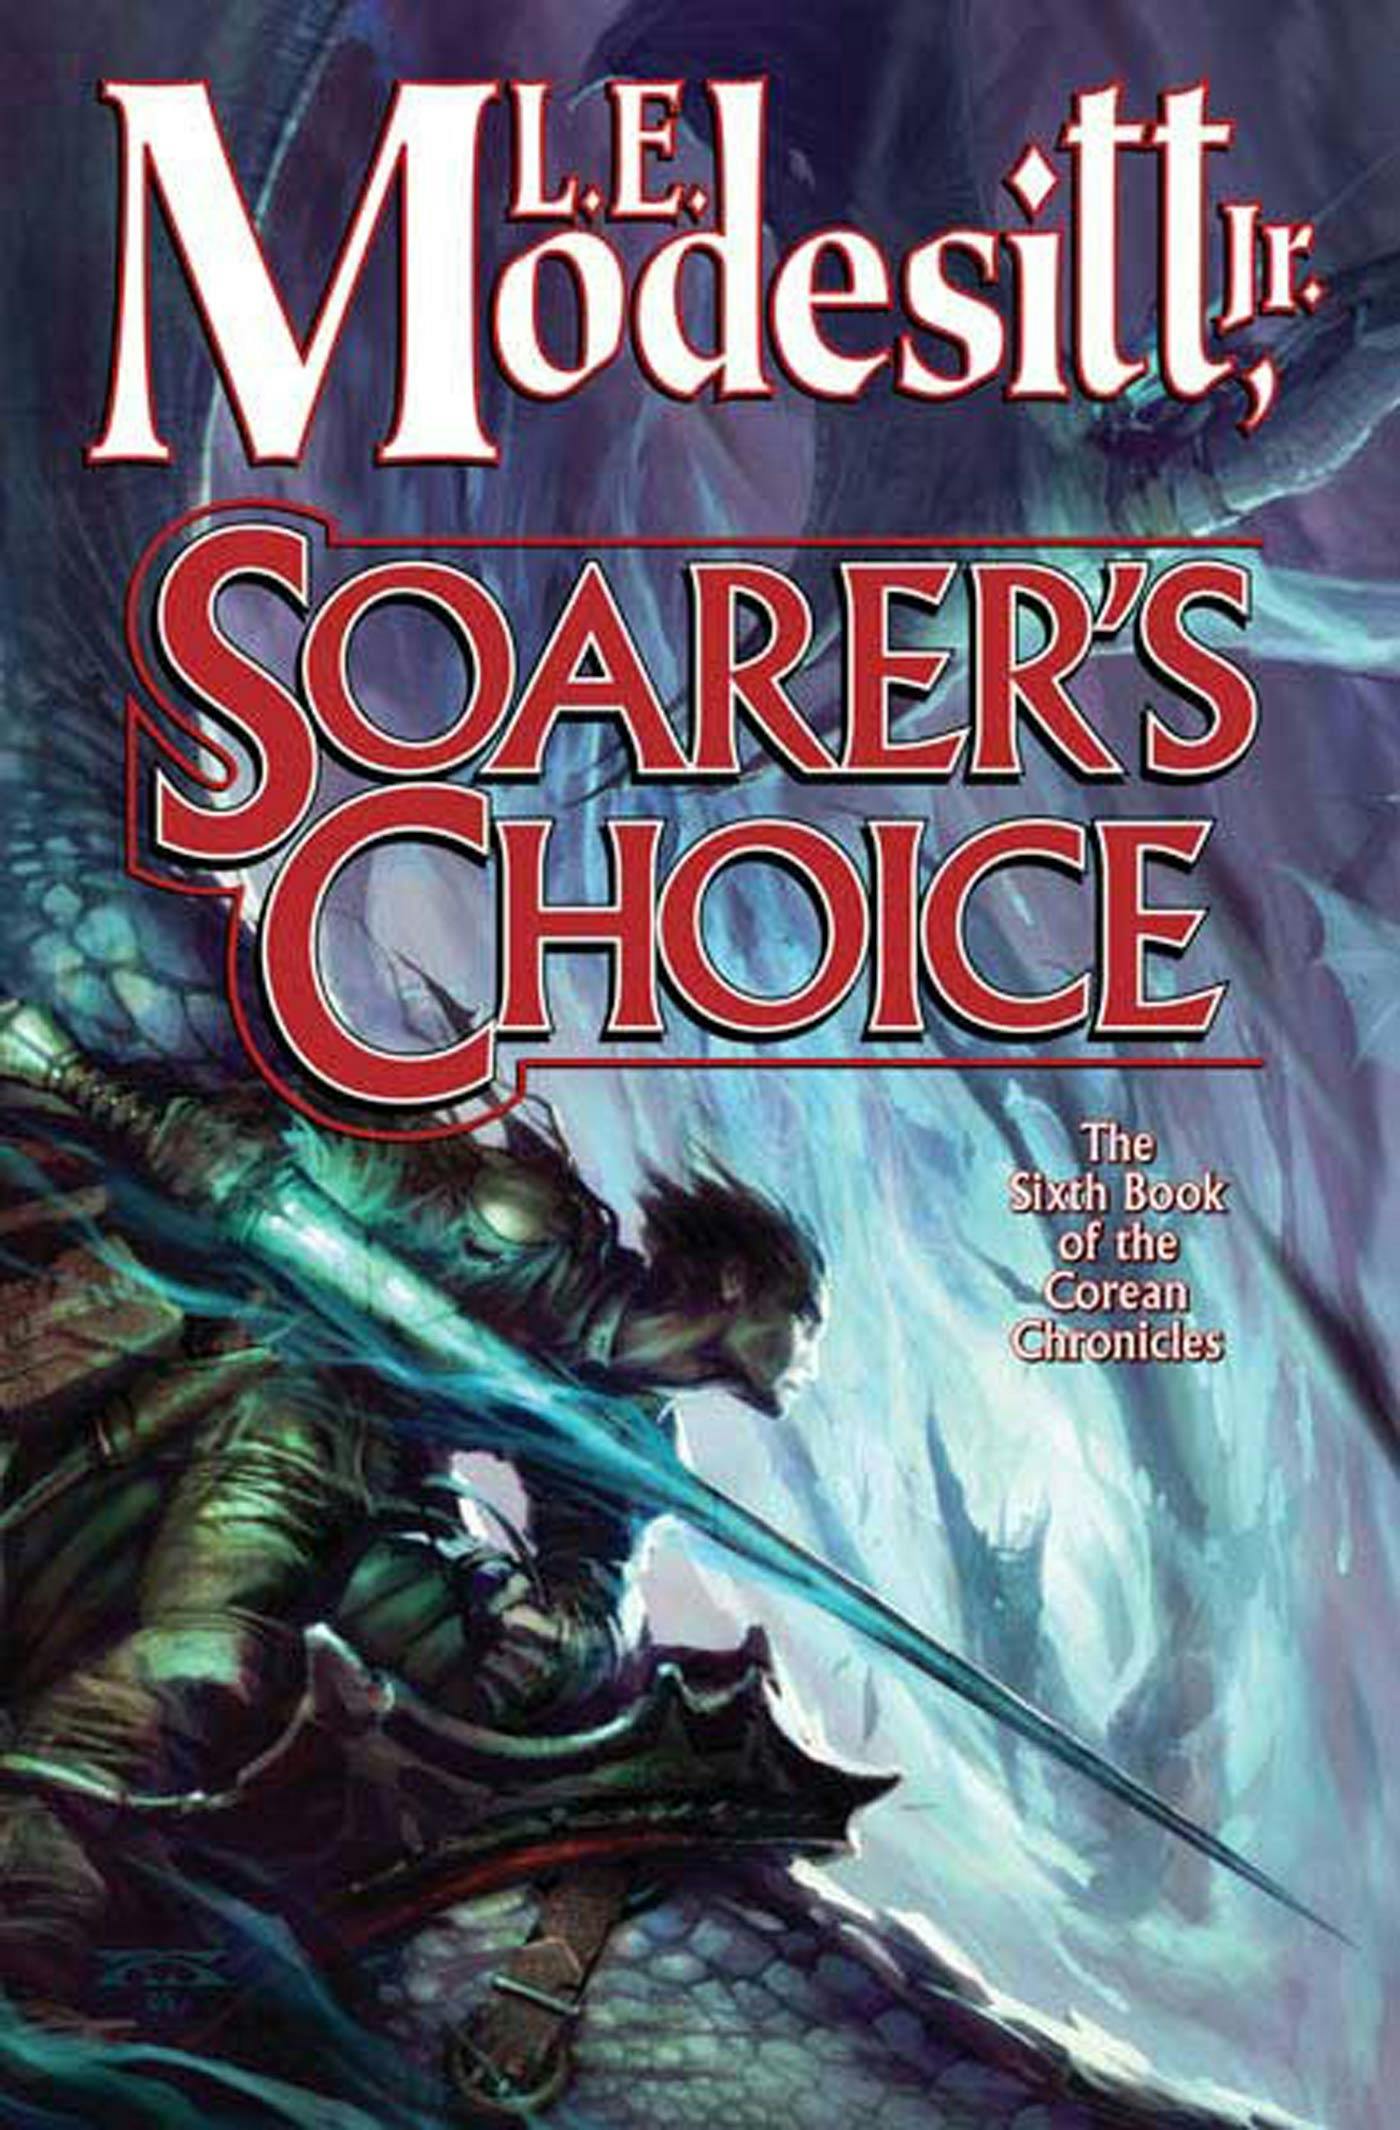 Cover for the book titled as: Soarer's Choice